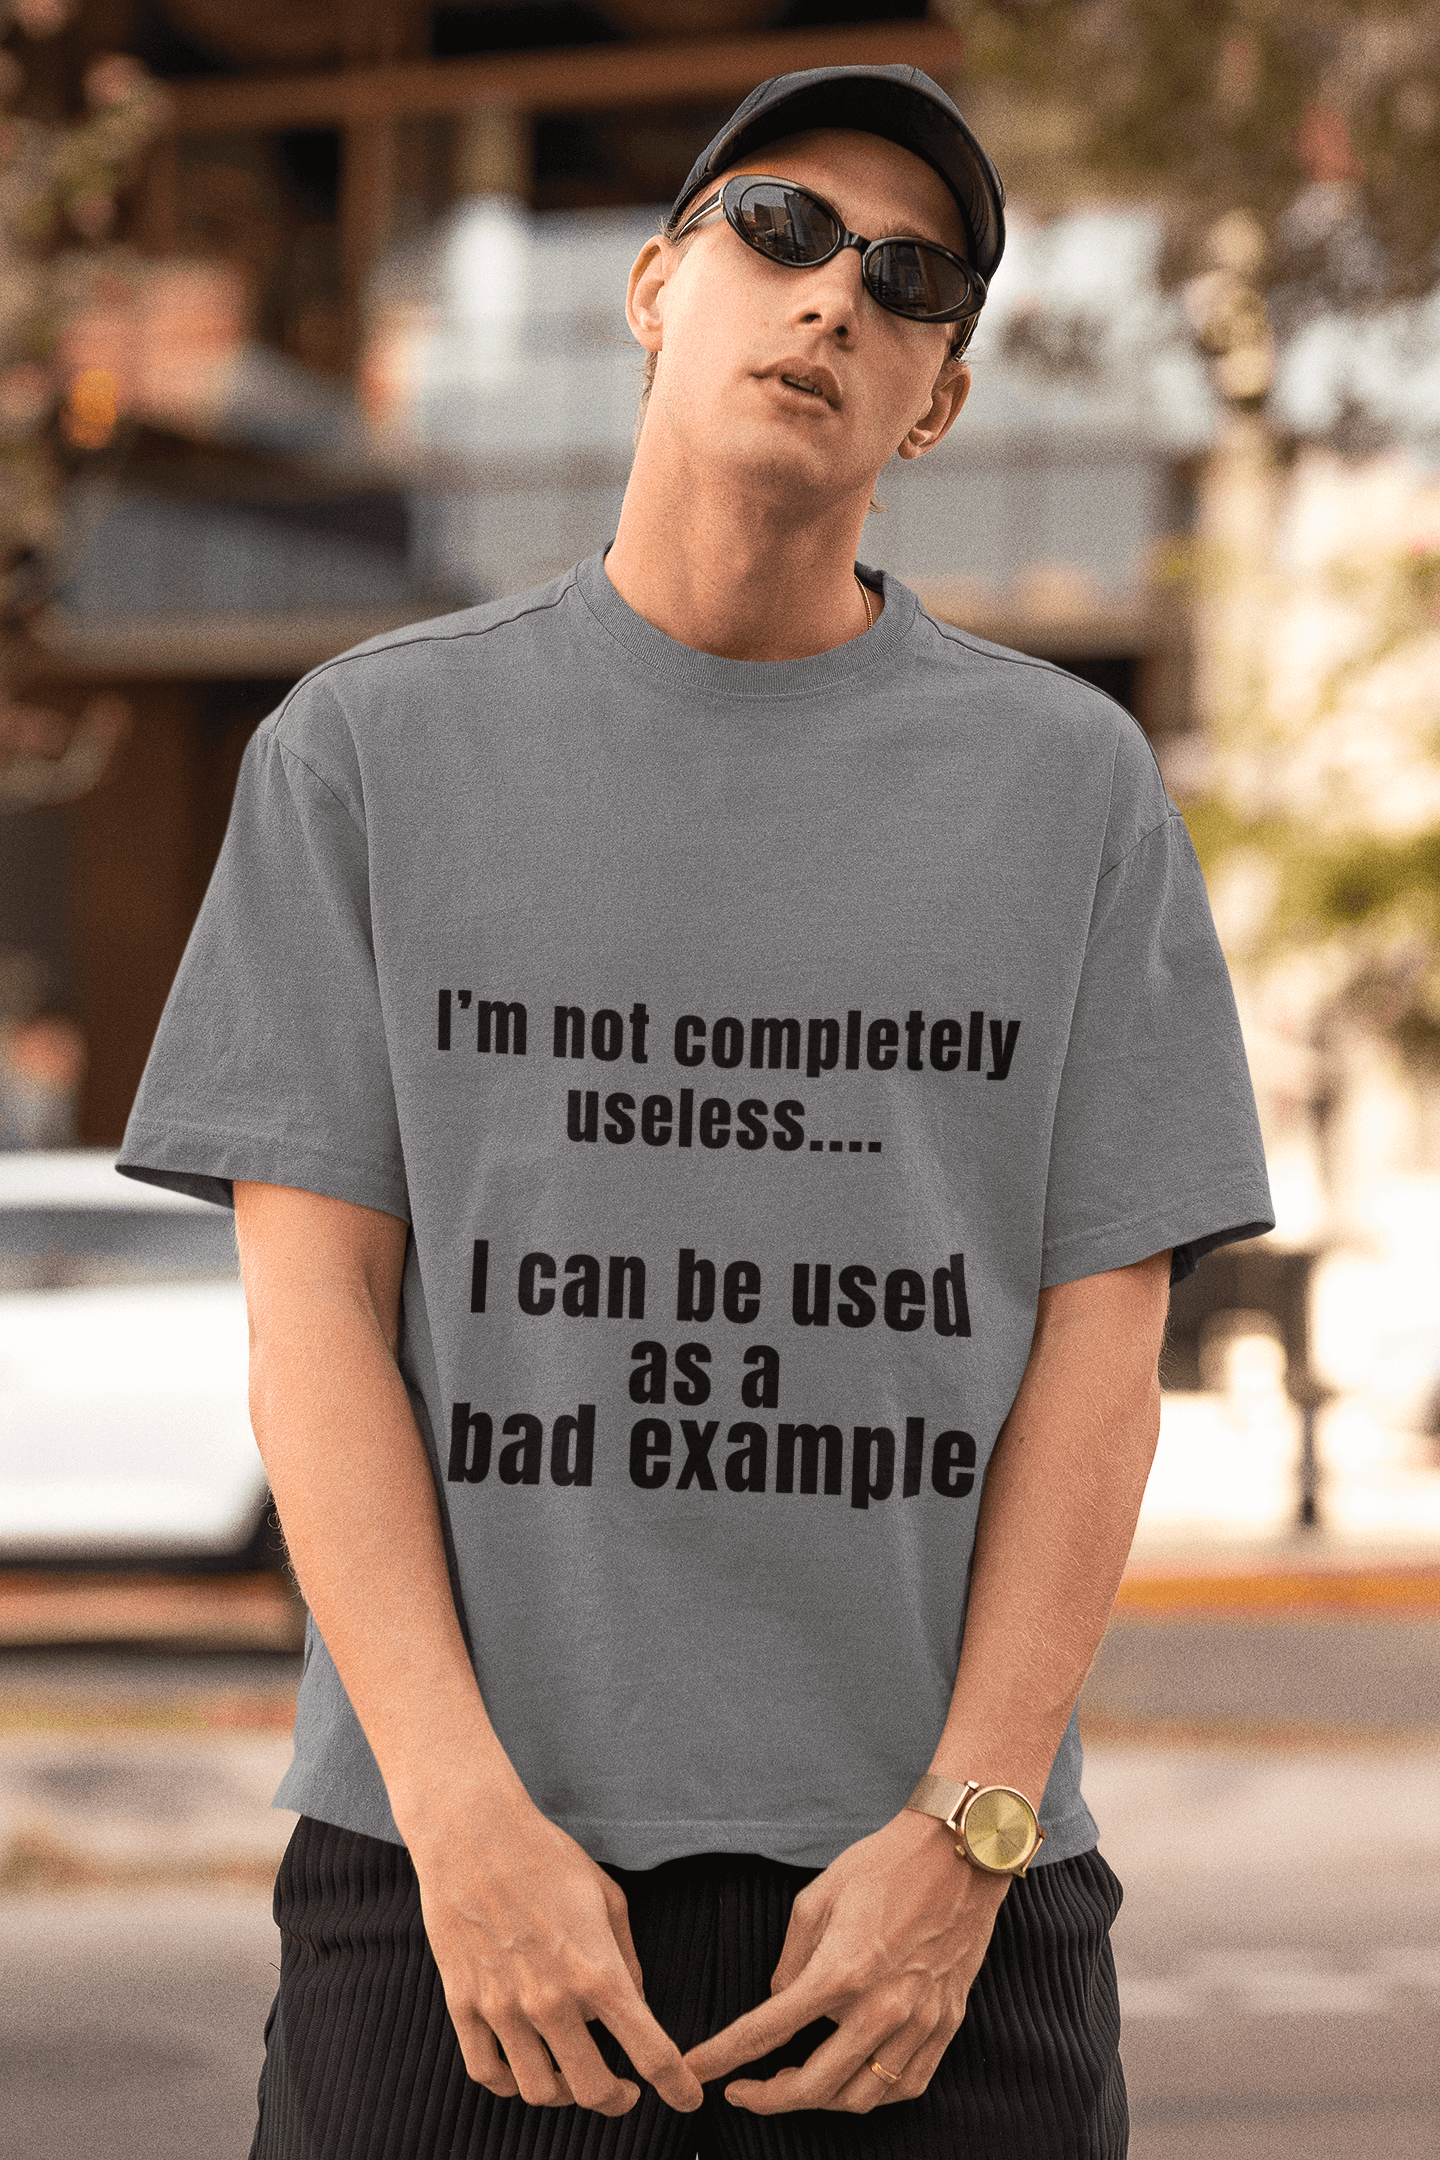 I'm not completely useless, I can be used as a bad example - Unisex Short-Sleeve T-Shirt, Handmade gift, funny shirt, moisture wicking